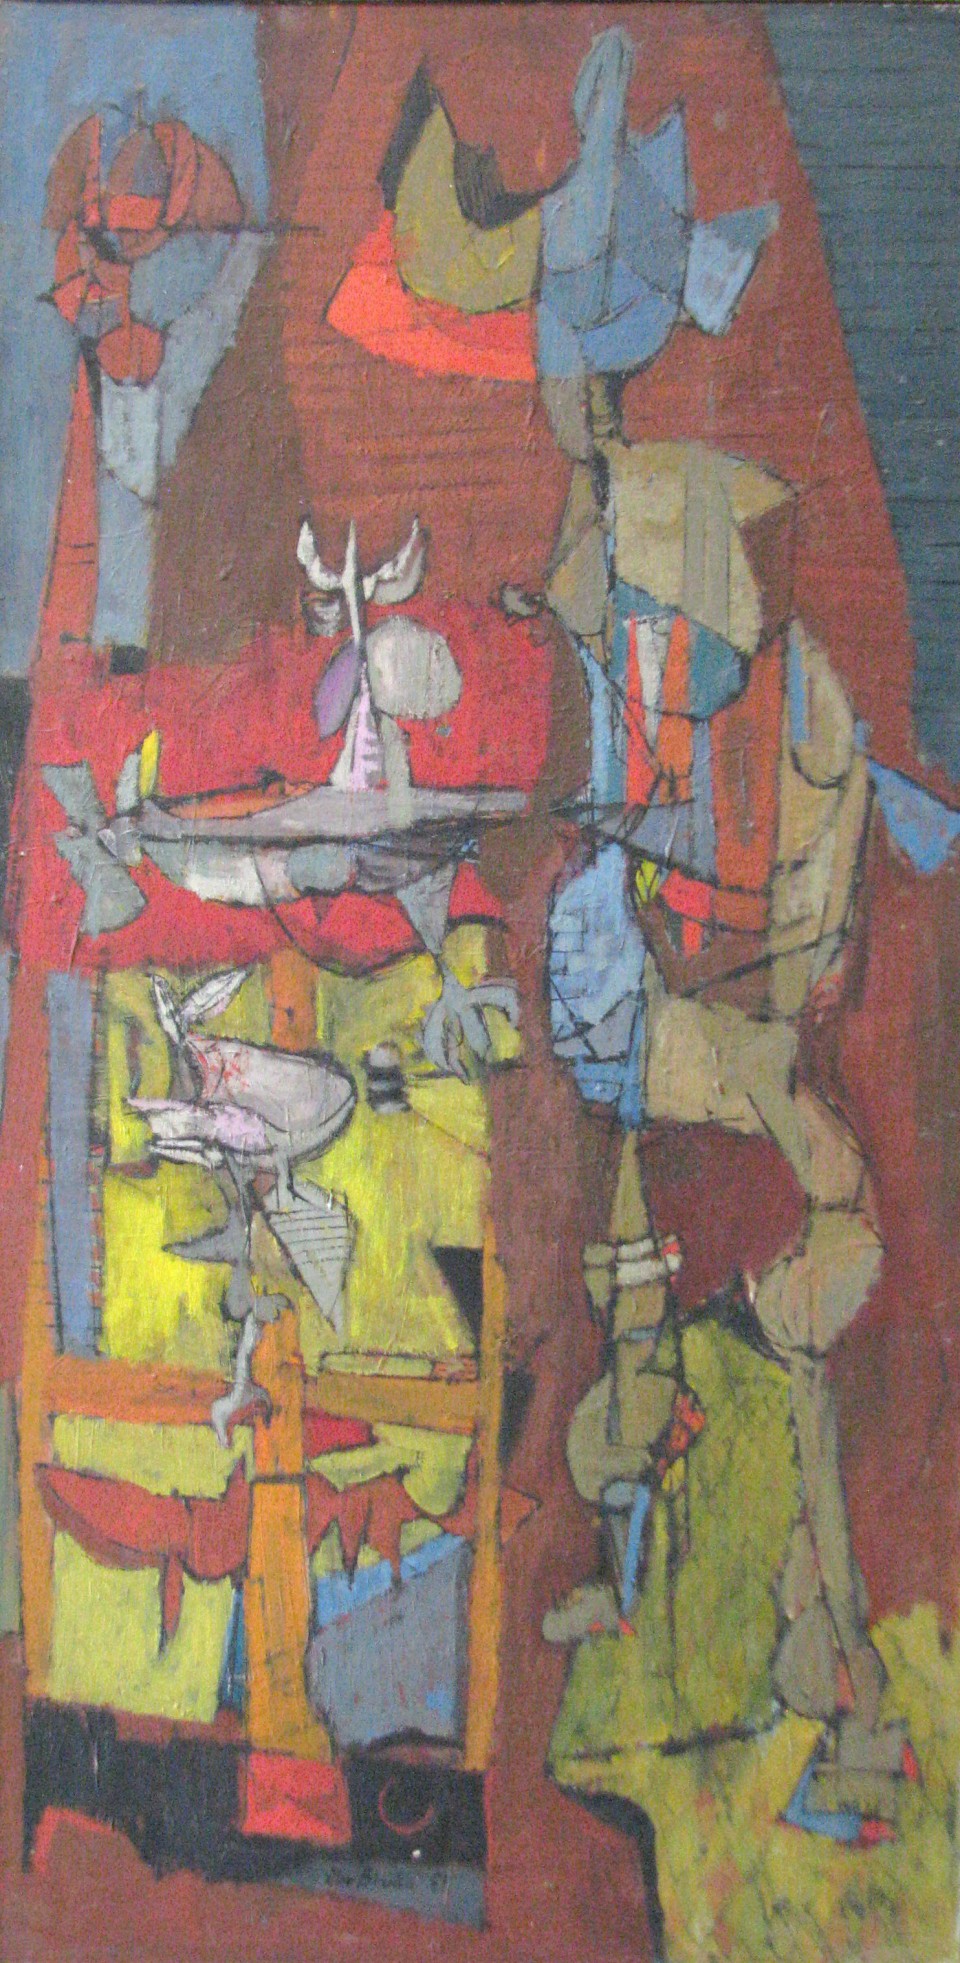 Figural Abstraction, 1951
Oil on Panel